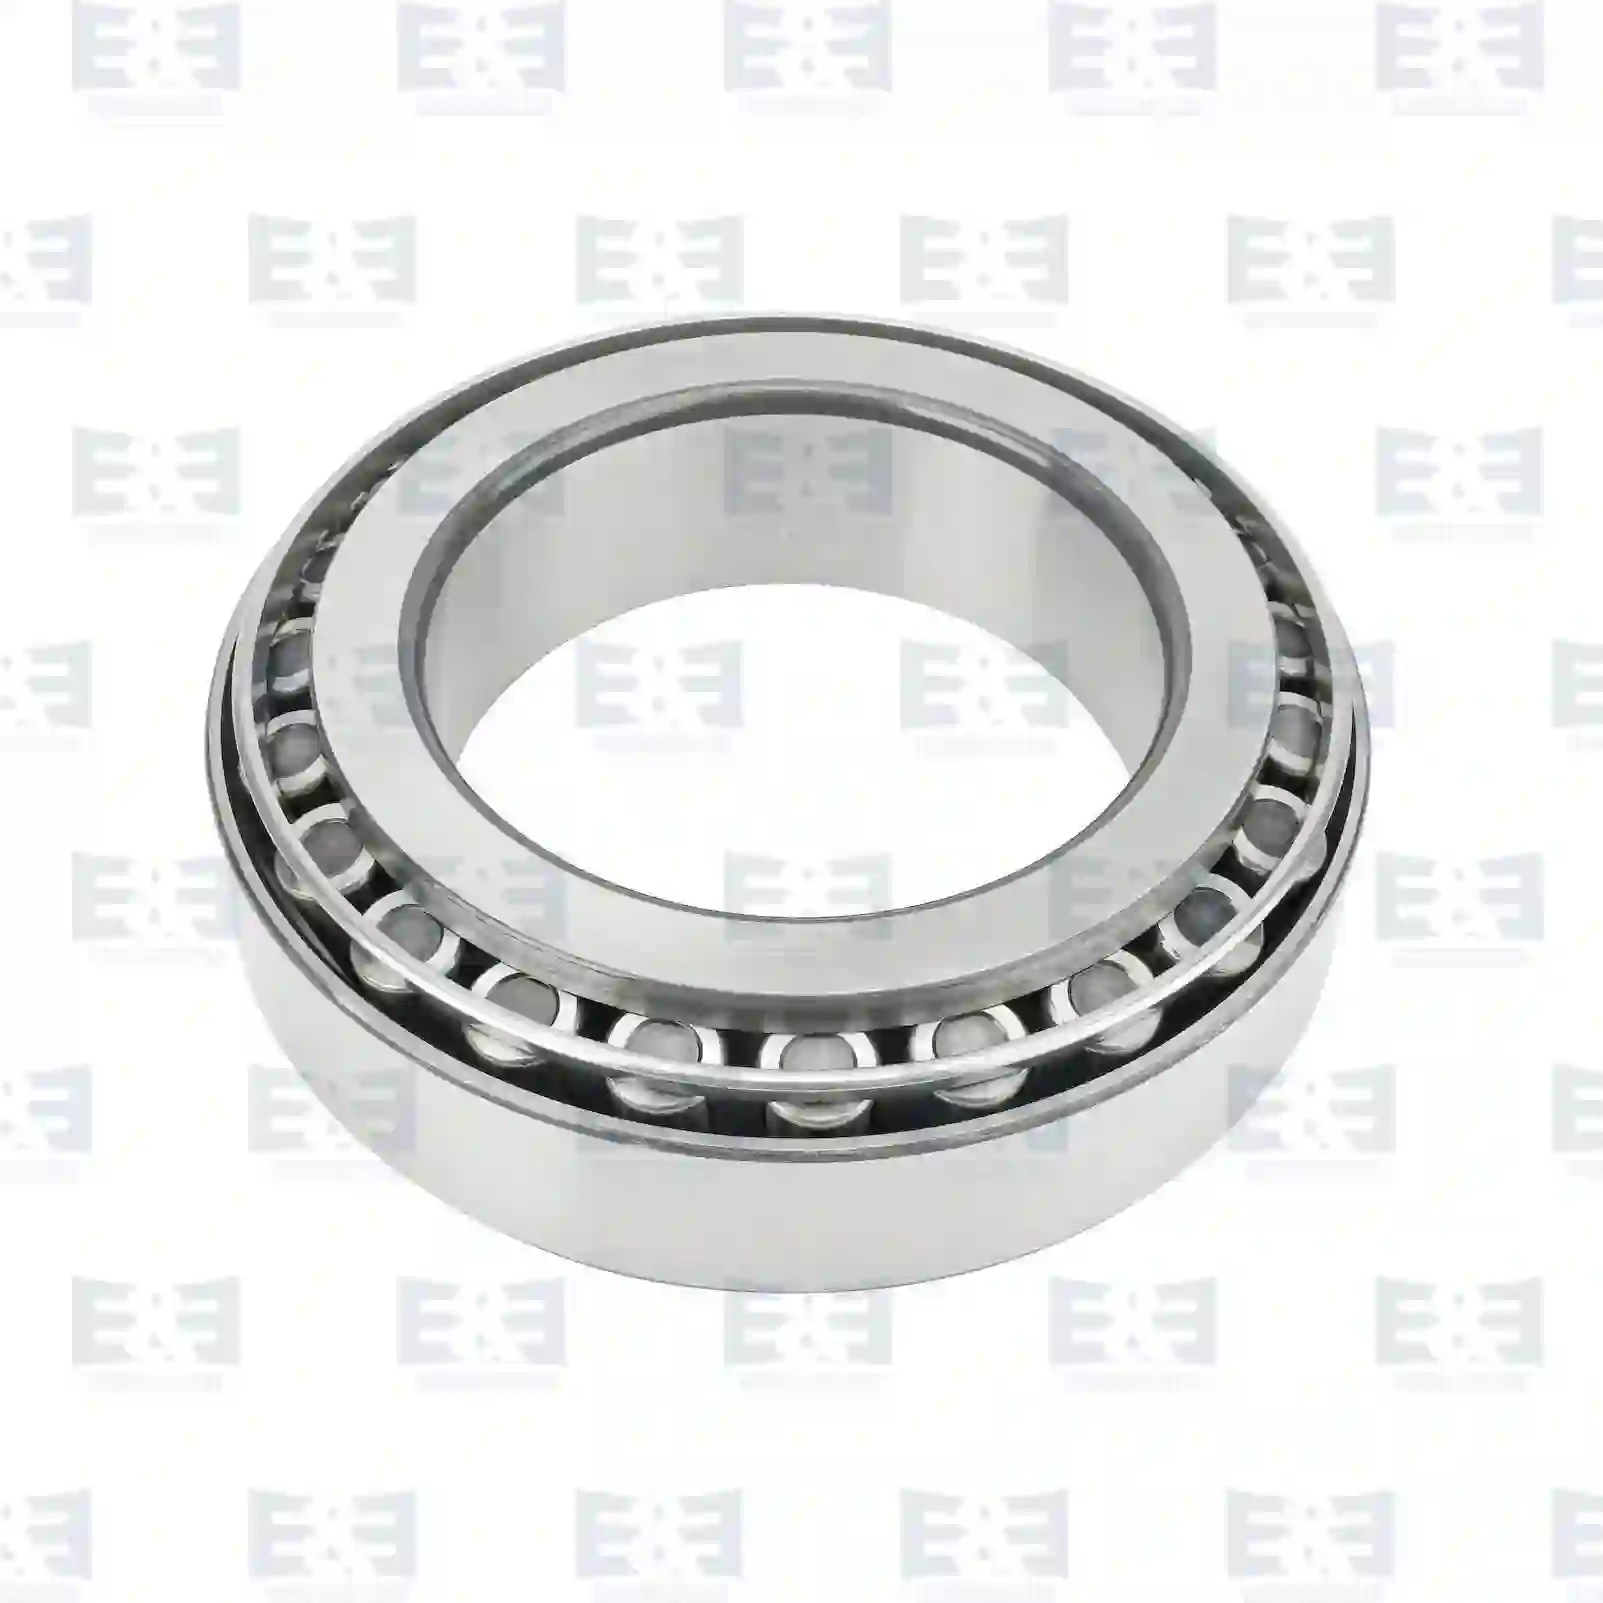 Tapered roller bearing, 2E2286481, 9442156, 08194959, 0023336046, 0023336123, 0959901205, 3661013900, 324791025000, JHM72024999401, 2V2501319B ||  2E2286481 E&E Truck Spare Parts | Truck Spare Parts, Auotomotive Spare Parts Tapered roller bearing, 2E2286481, 9442156, 08194959, 0023336046, 0023336123, 0959901205, 3661013900, 324791025000, JHM72024999401, 2V2501319B ||  2E2286481 E&E Truck Spare Parts | Truck Spare Parts, Auotomotive Spare Parts